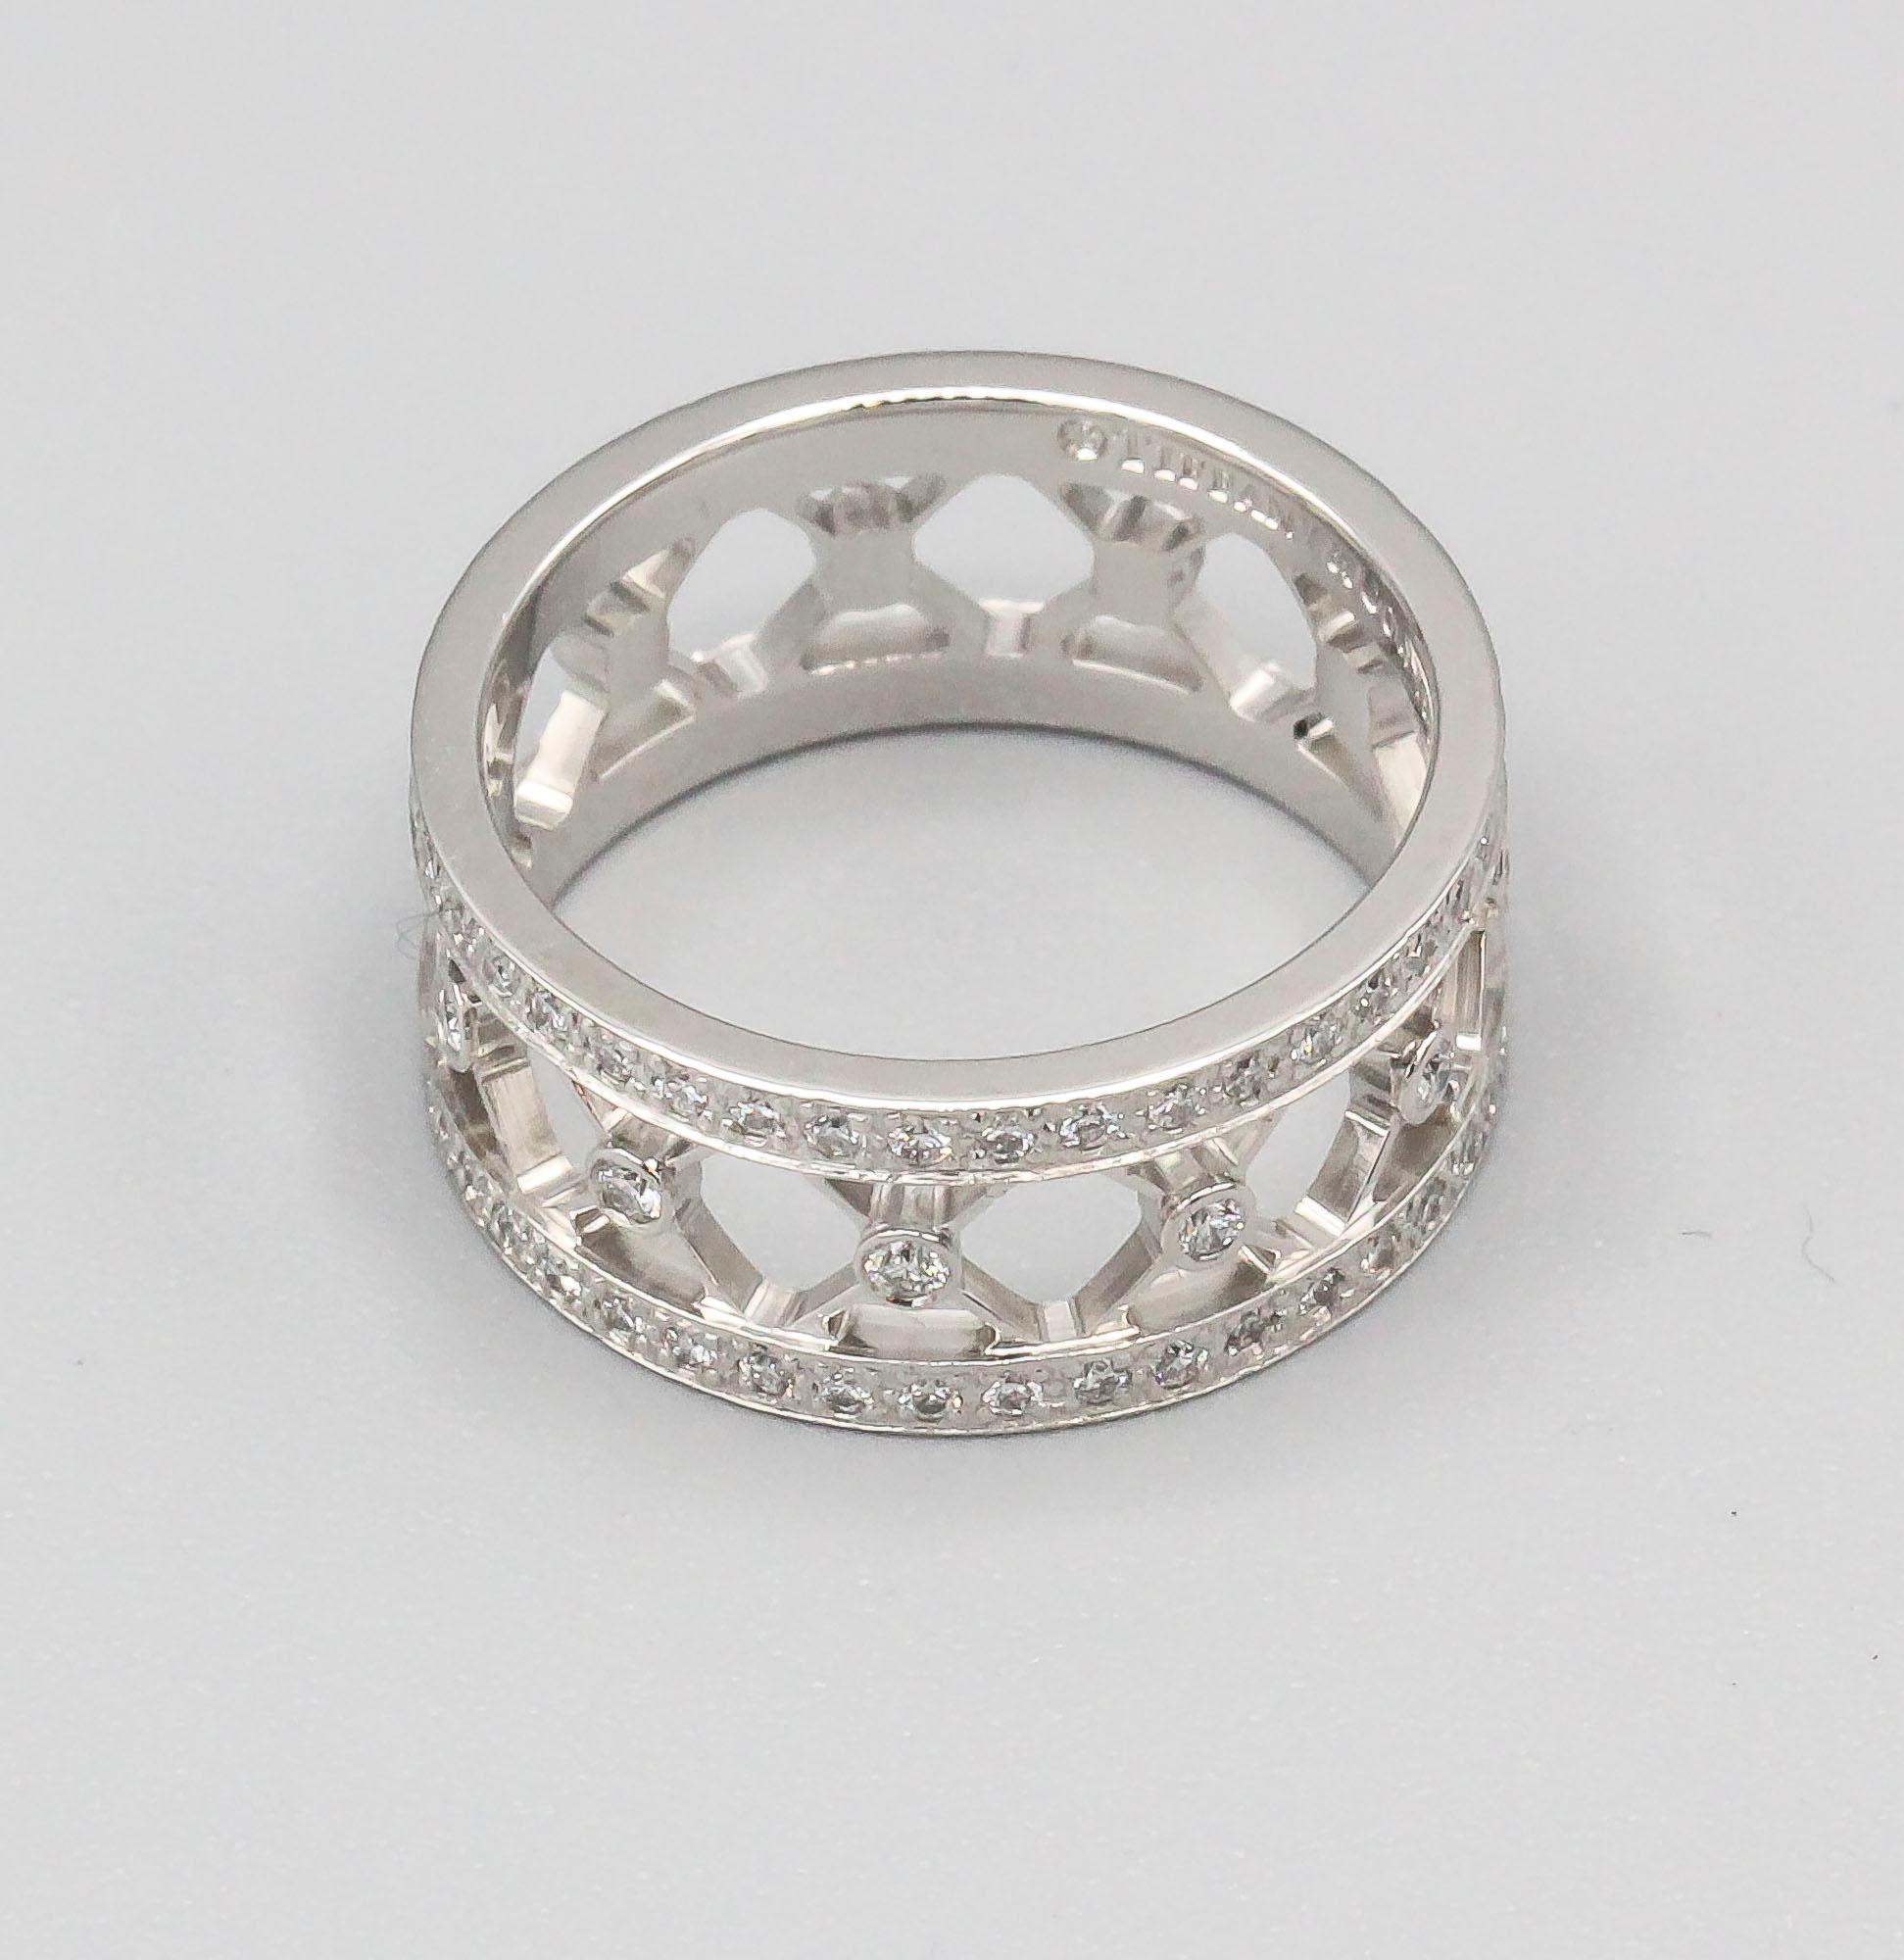 Fine platinum and diamond band ring from the 